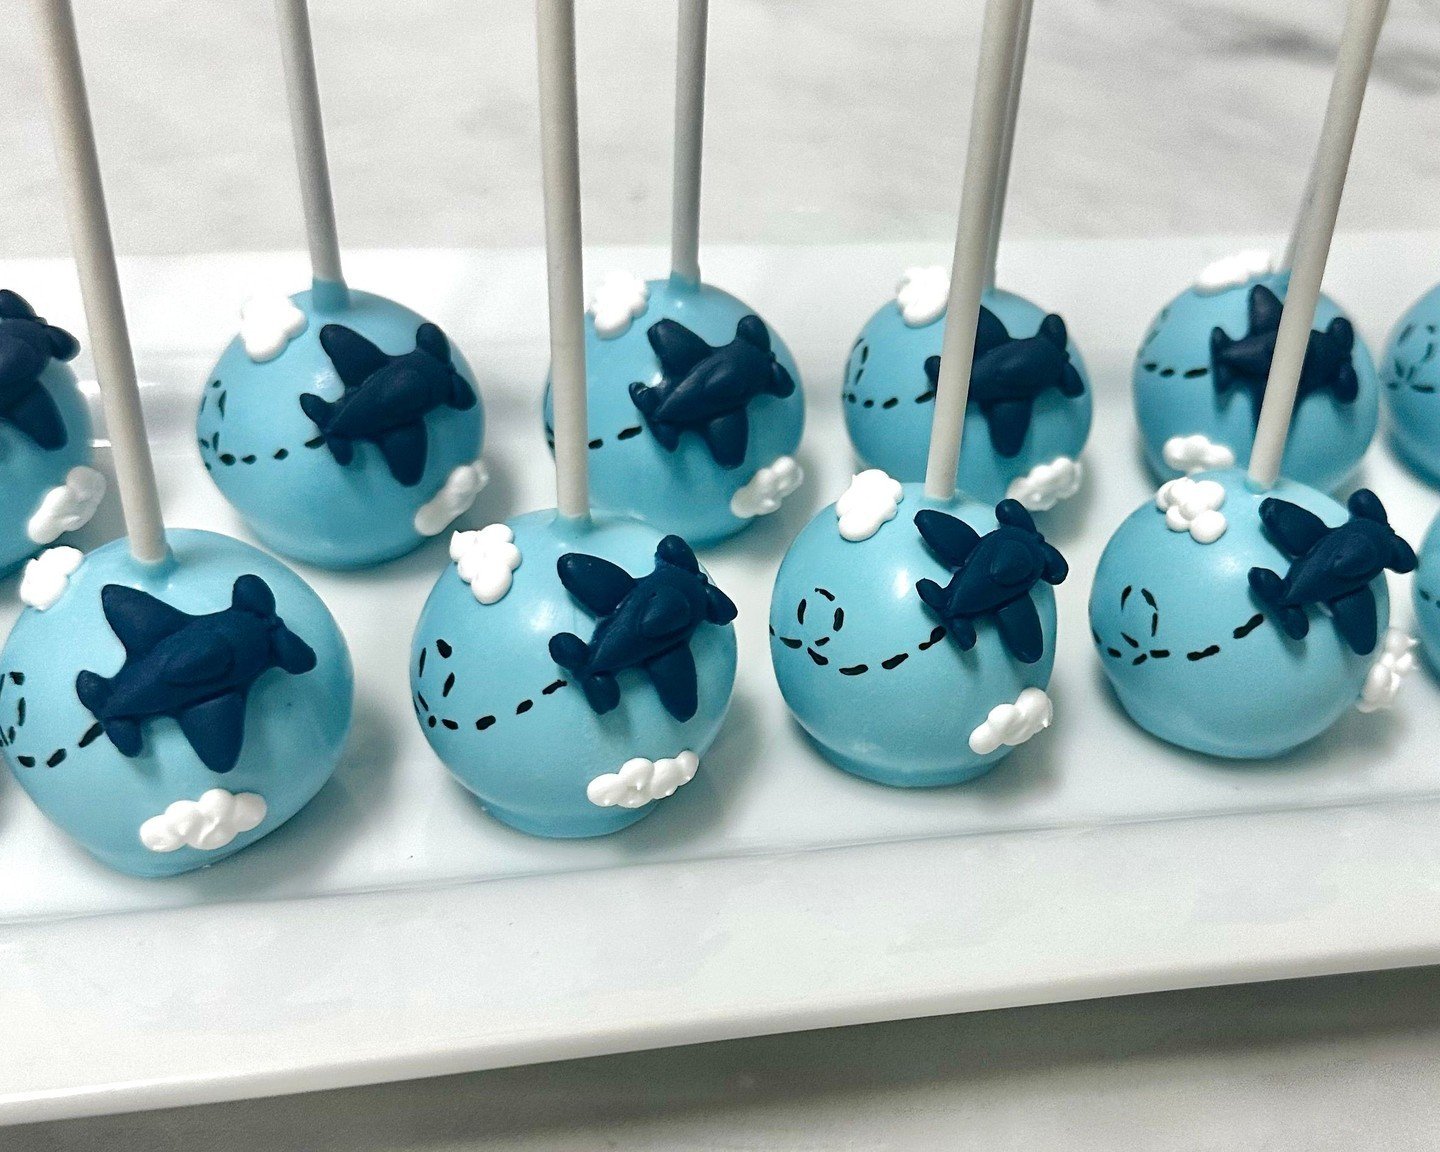 Airplane cake pops! Take your mouth on a vacation ✈️

#airplanecakepops #kupcakekitchen #wantcake #vacationfood #travelfood #travellover #designercakepops #cakepopstagram #instacakepops #cakepopping #cakepopart #cakepopmaker #cakepopper #cakepopcrazy